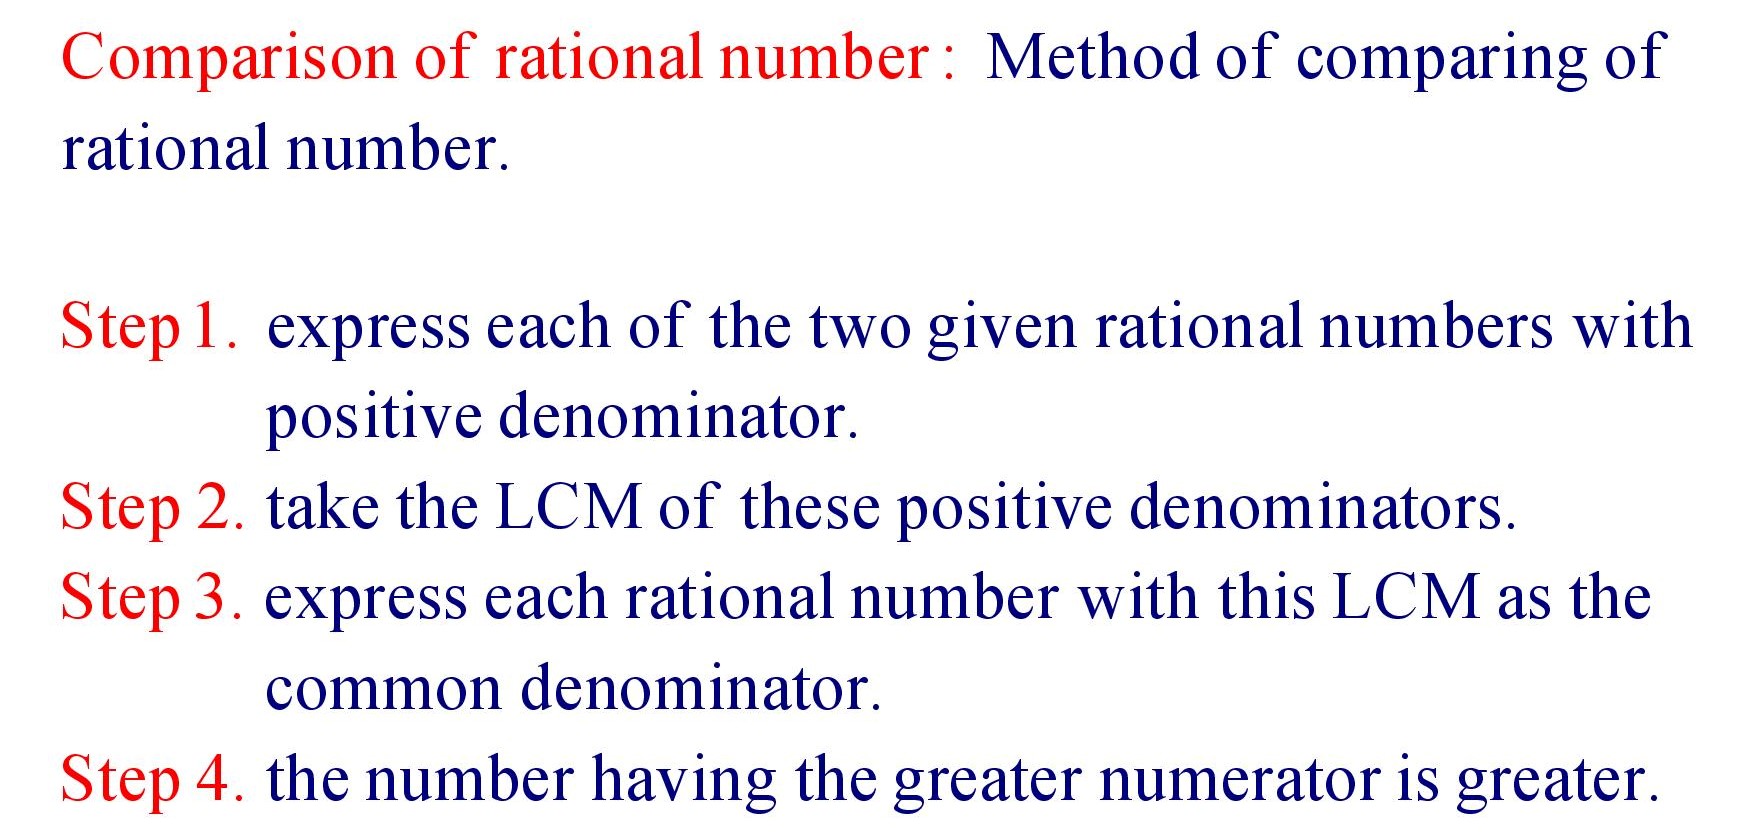 Comparison of Rational Number